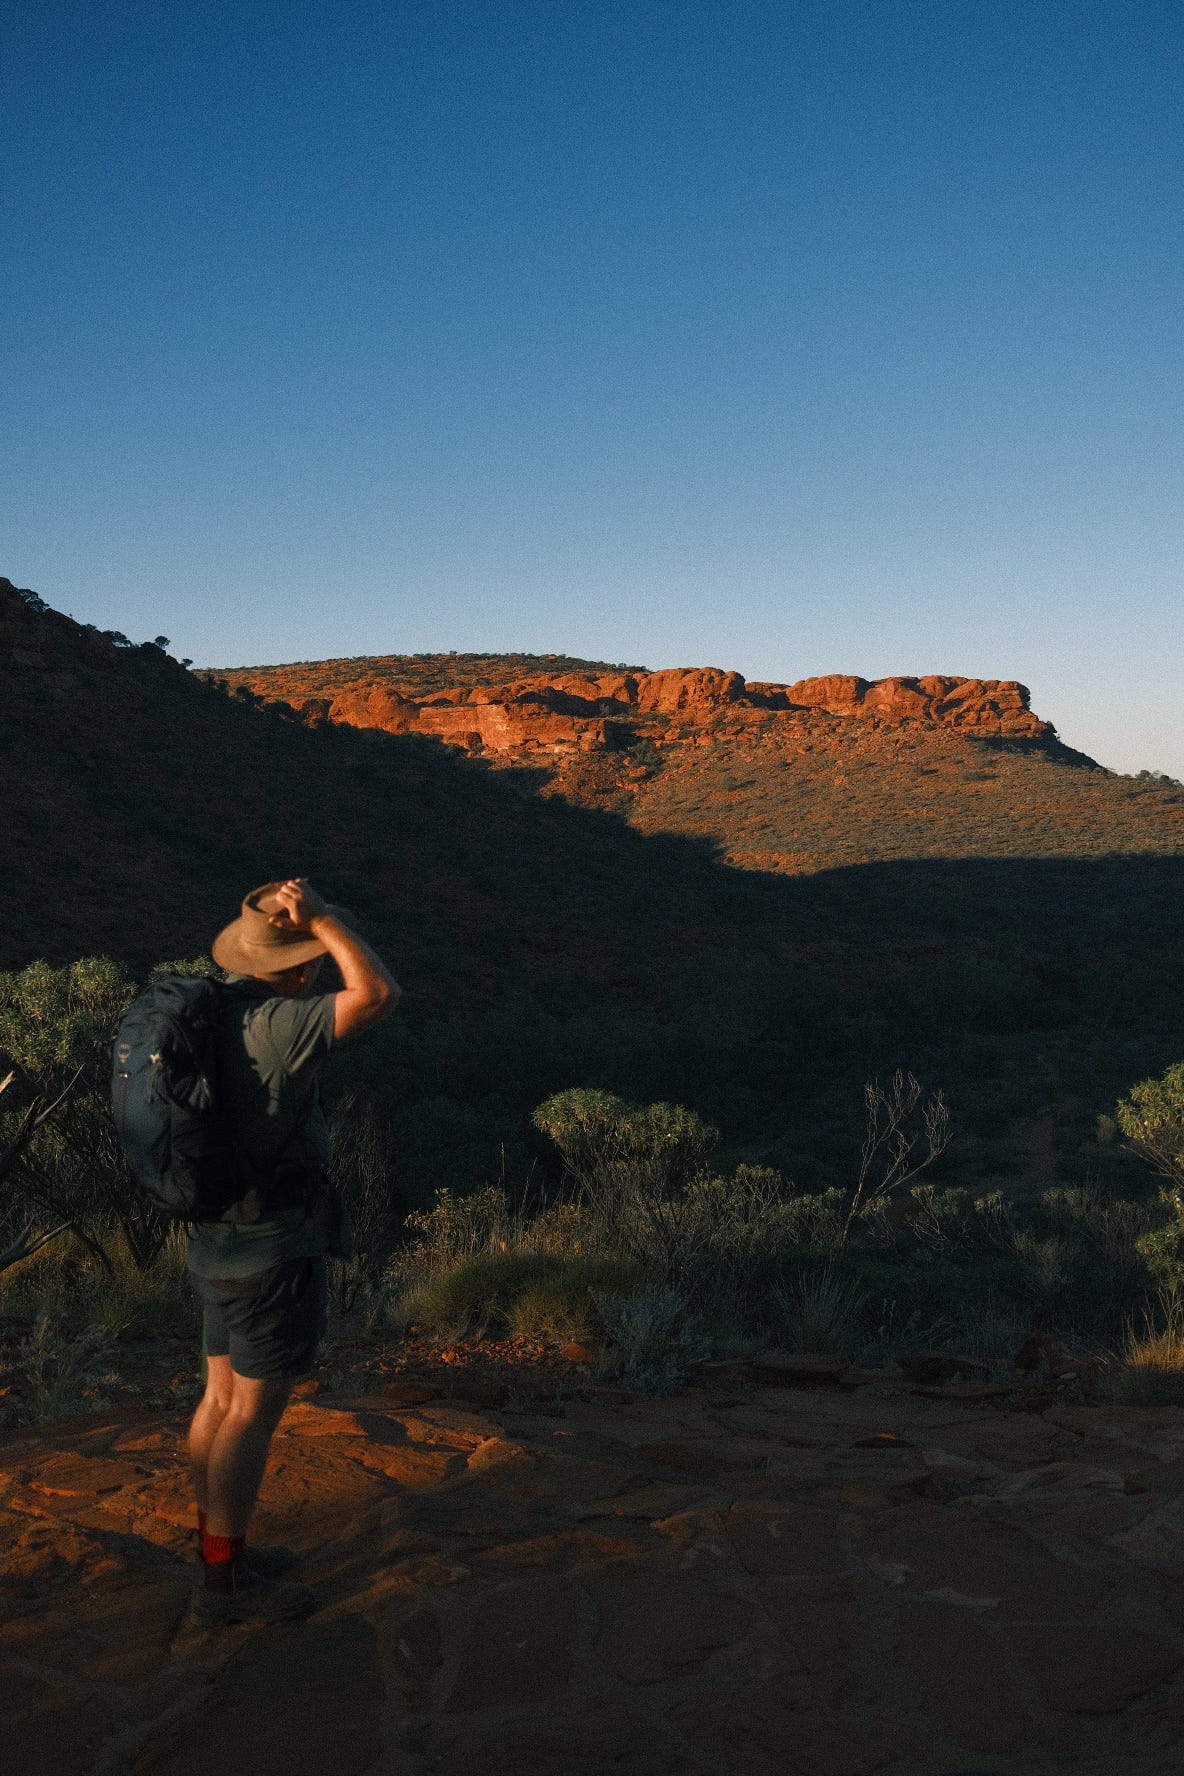 Tour guide looking out over the landscape at Kings Canyon in the Australian outback.